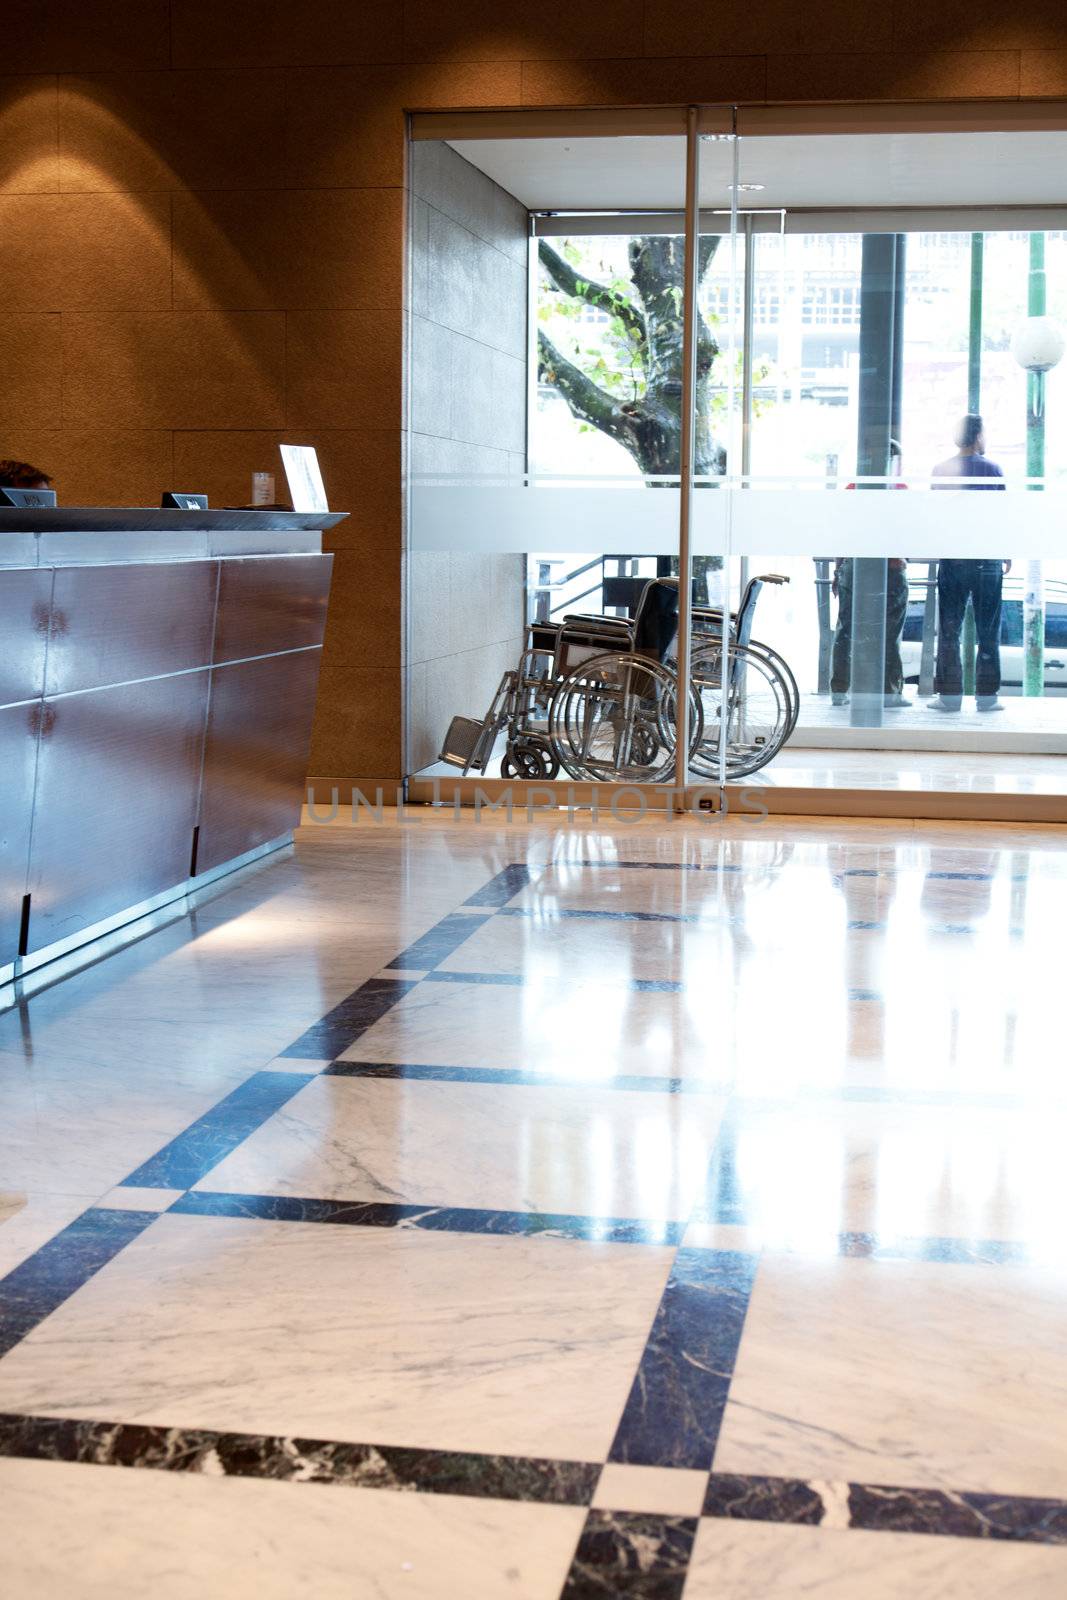 An hospital entry with wheel chair and reception